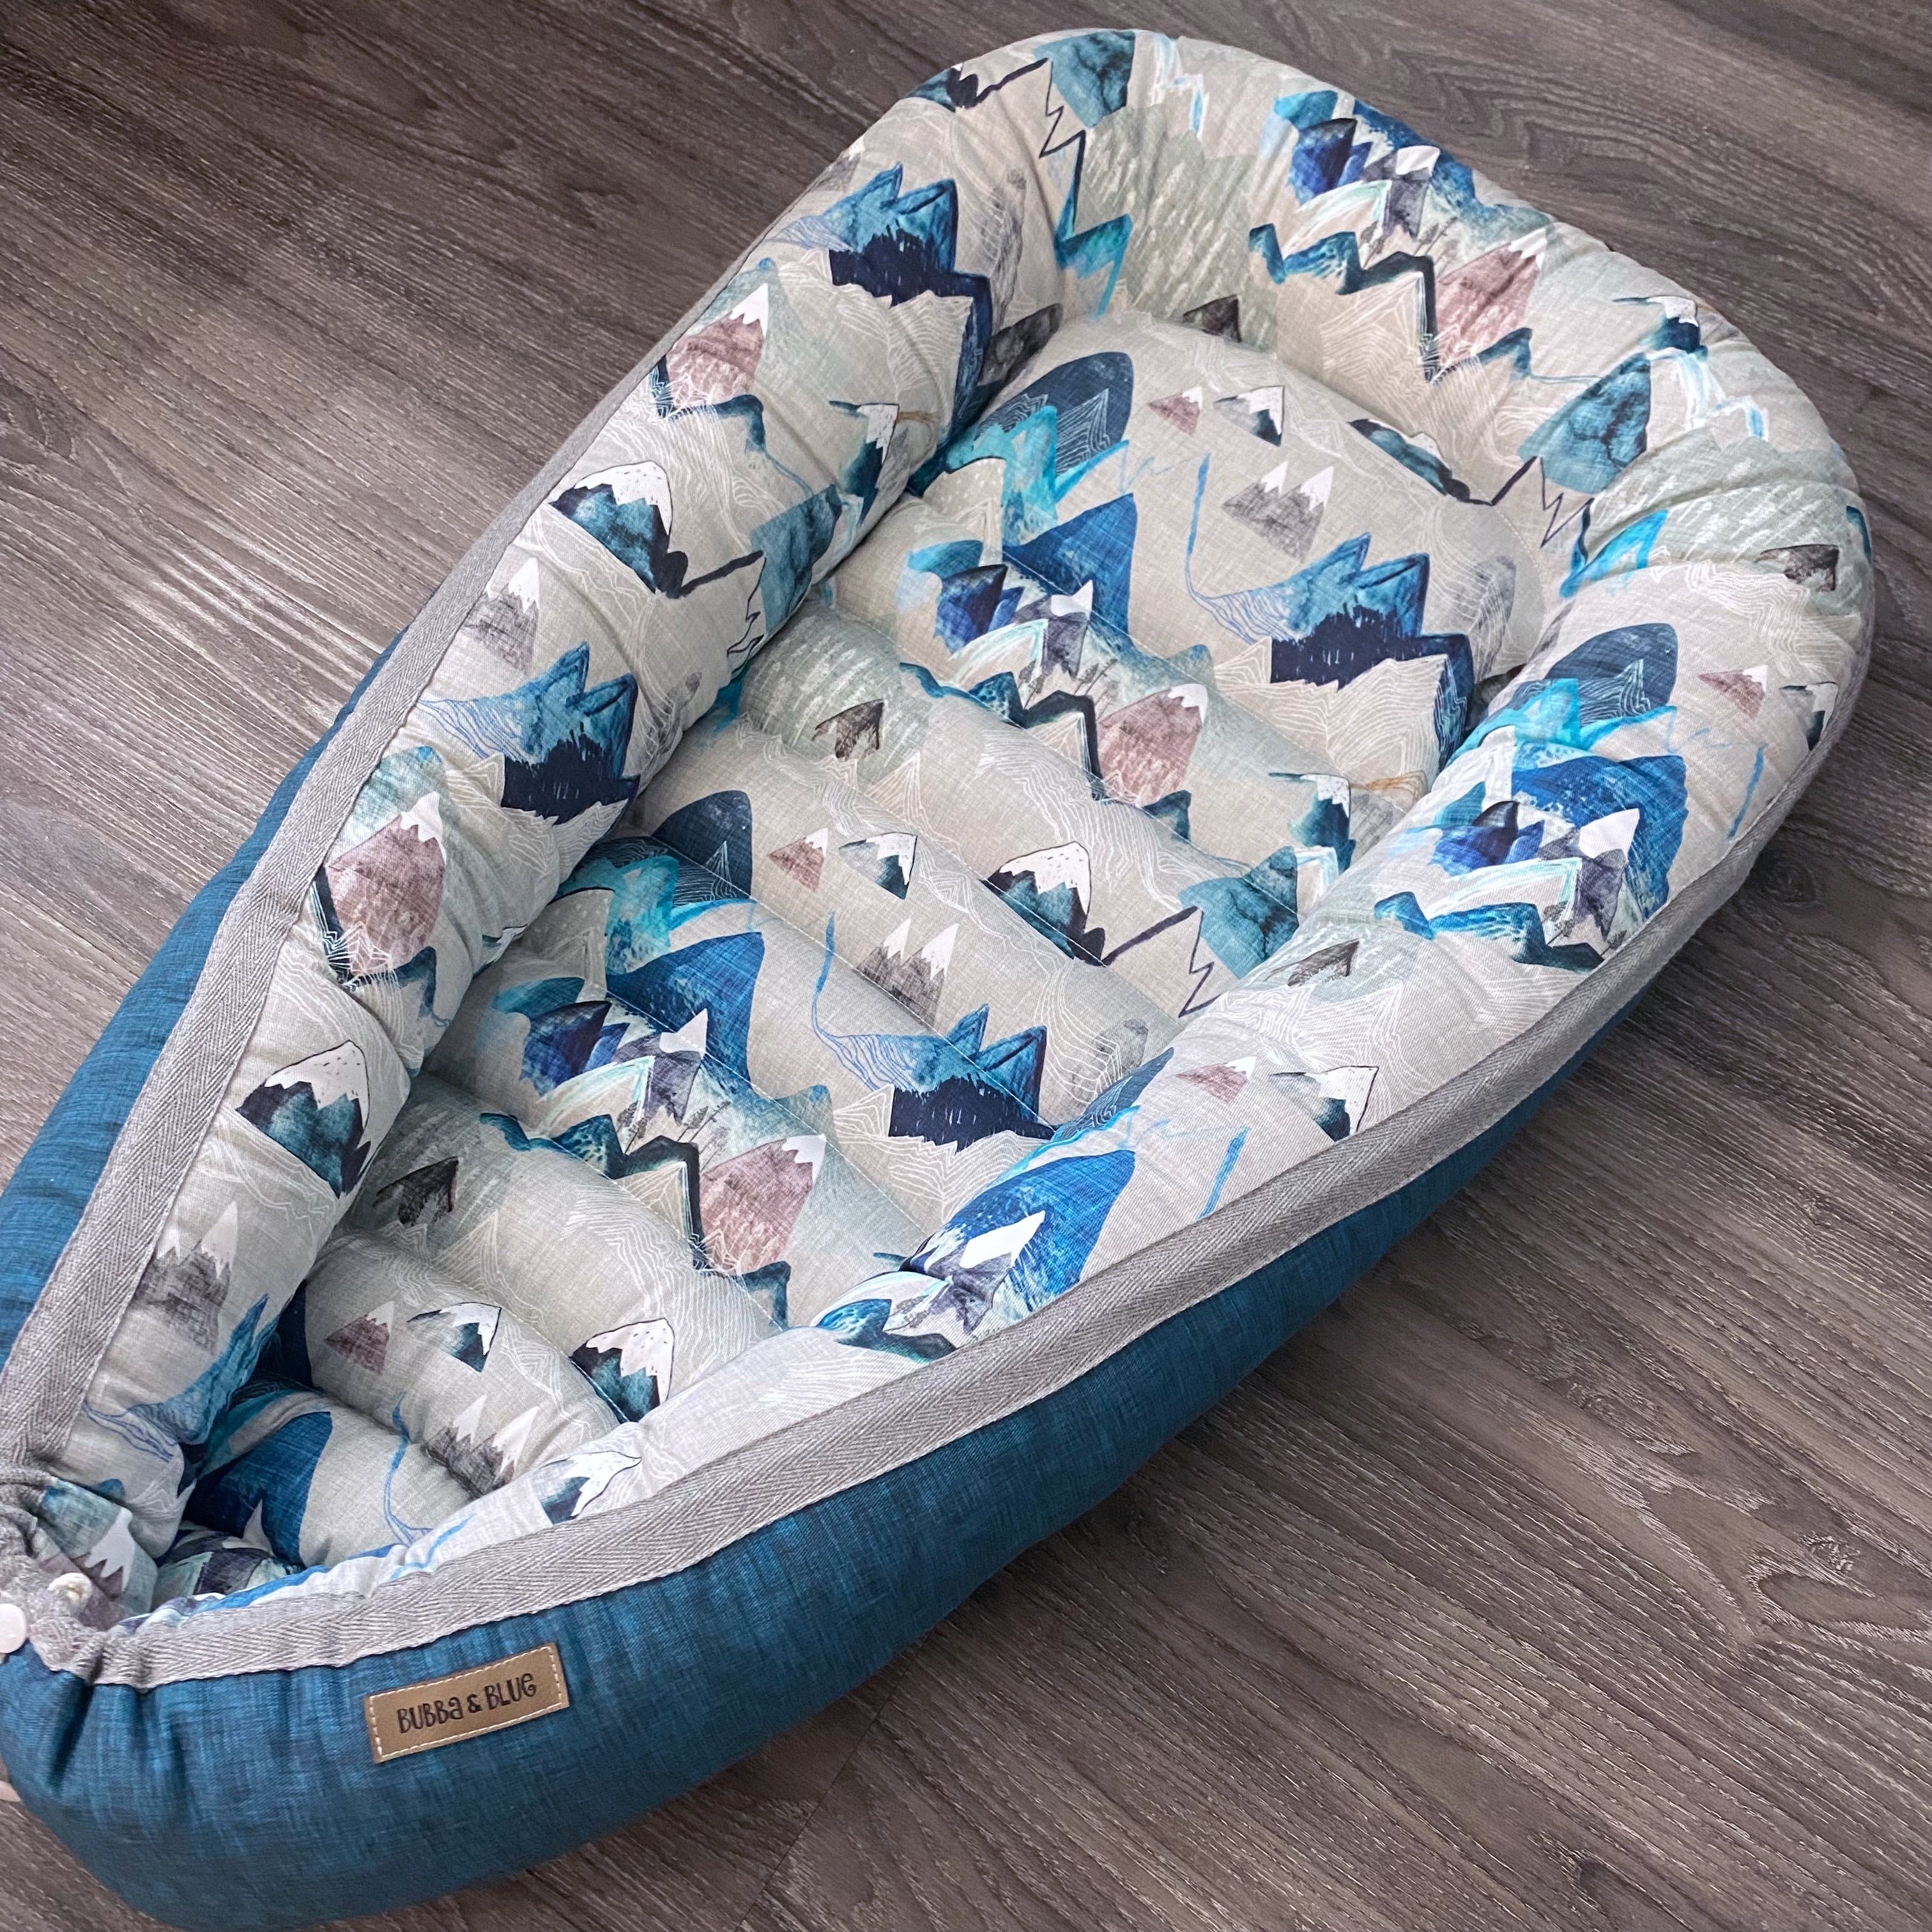 baby nest , baby lounging nest, co-sleeper, similar to dockatot and snuggle me products. This one is featured in a blue mountain design.